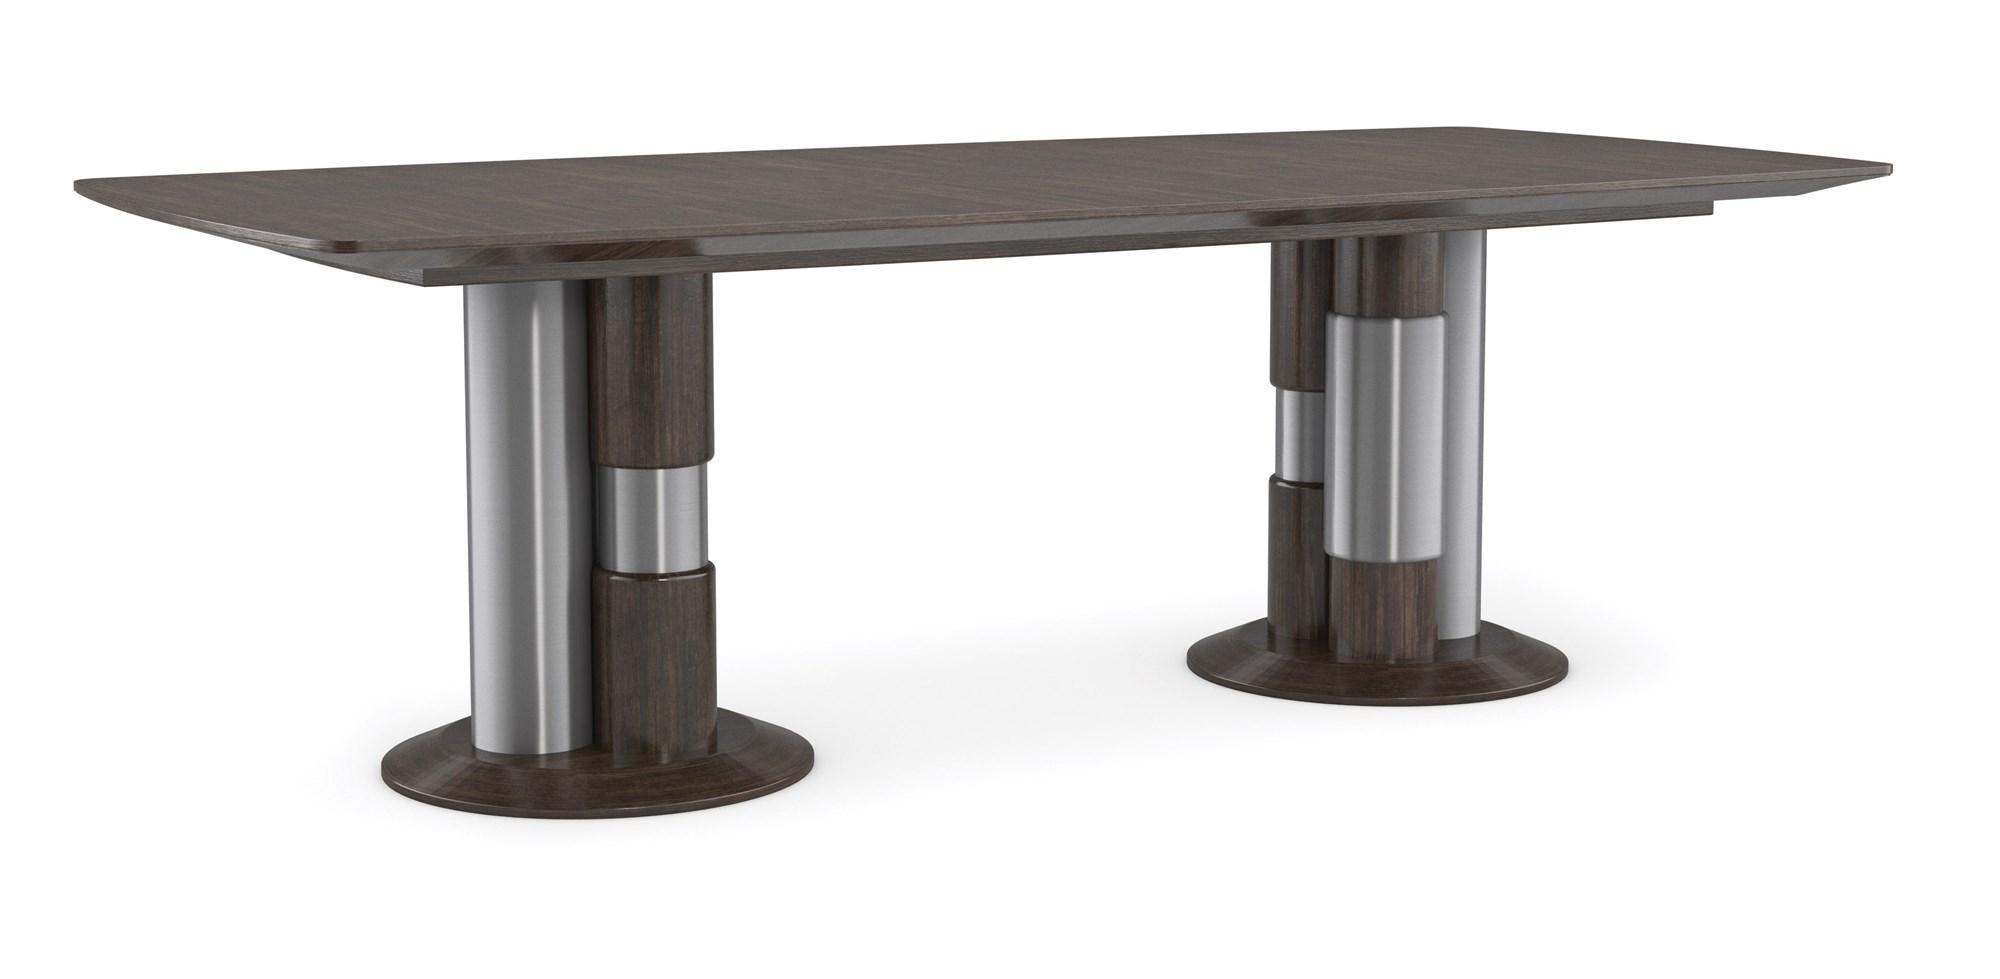 

    
Sepia & Smoked Stainless Steel Modern LA MODA DINING TABLE by Caracole
